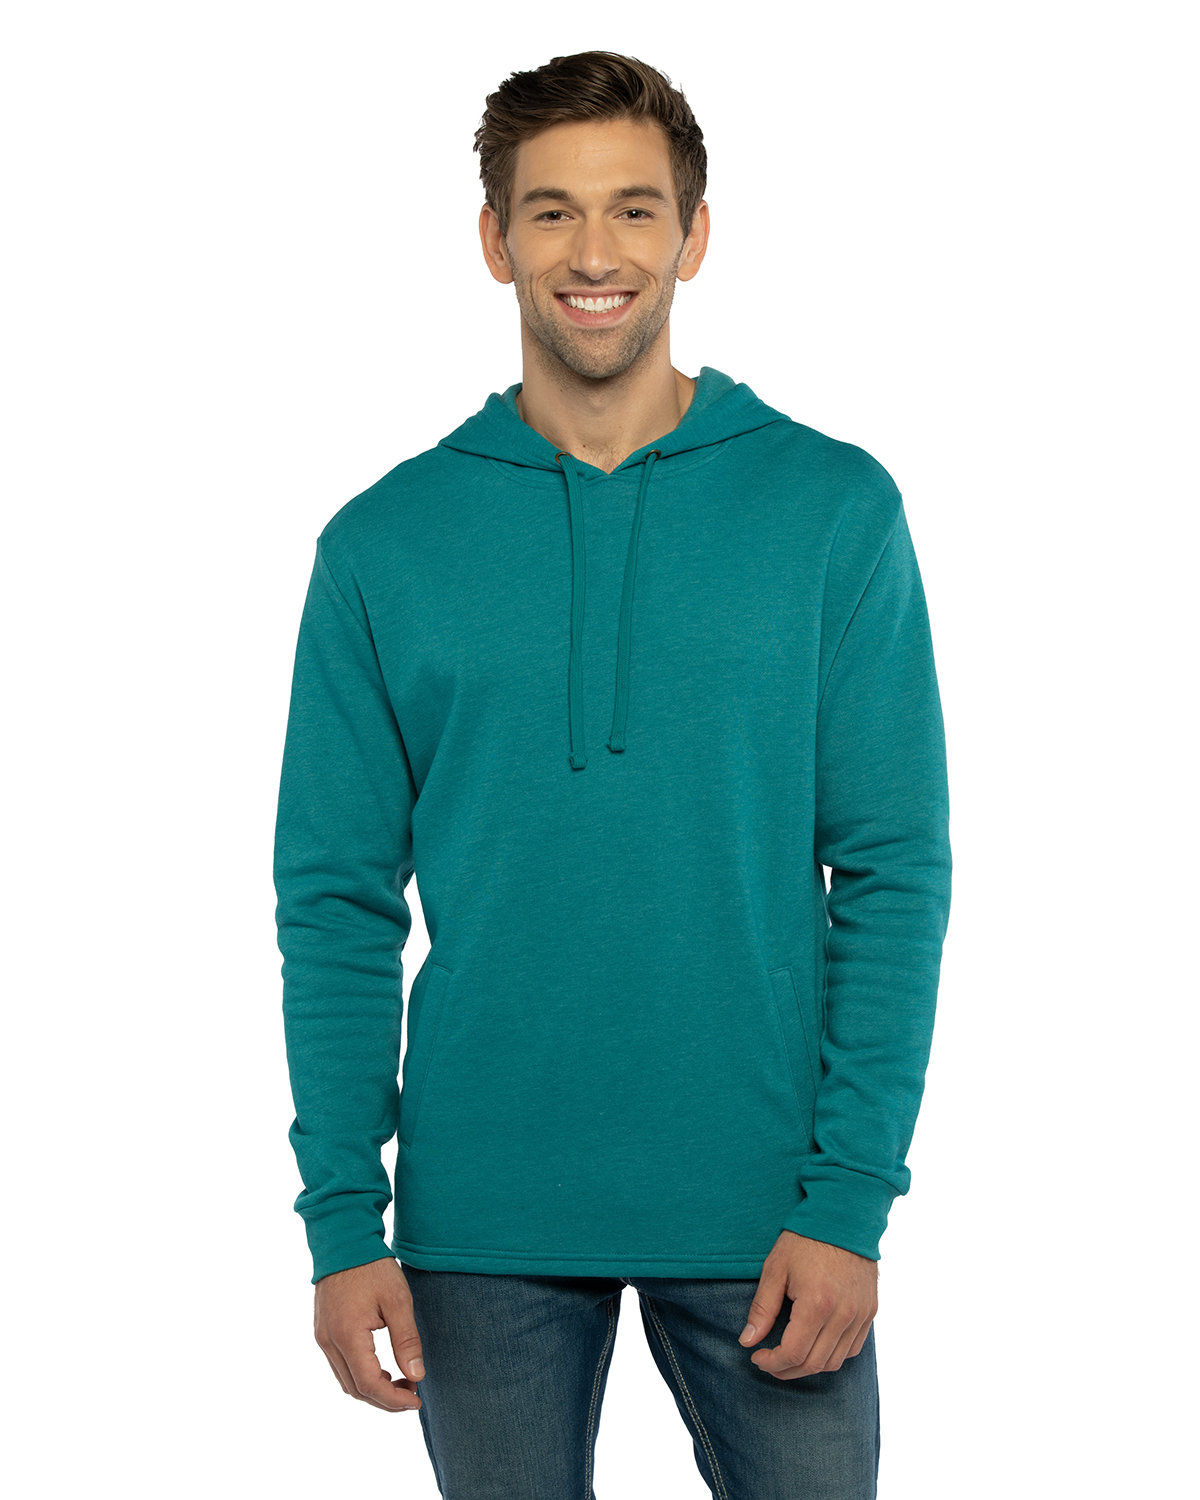 Next Level Apparel Adult PCH Pullover Hoodie heather teal 